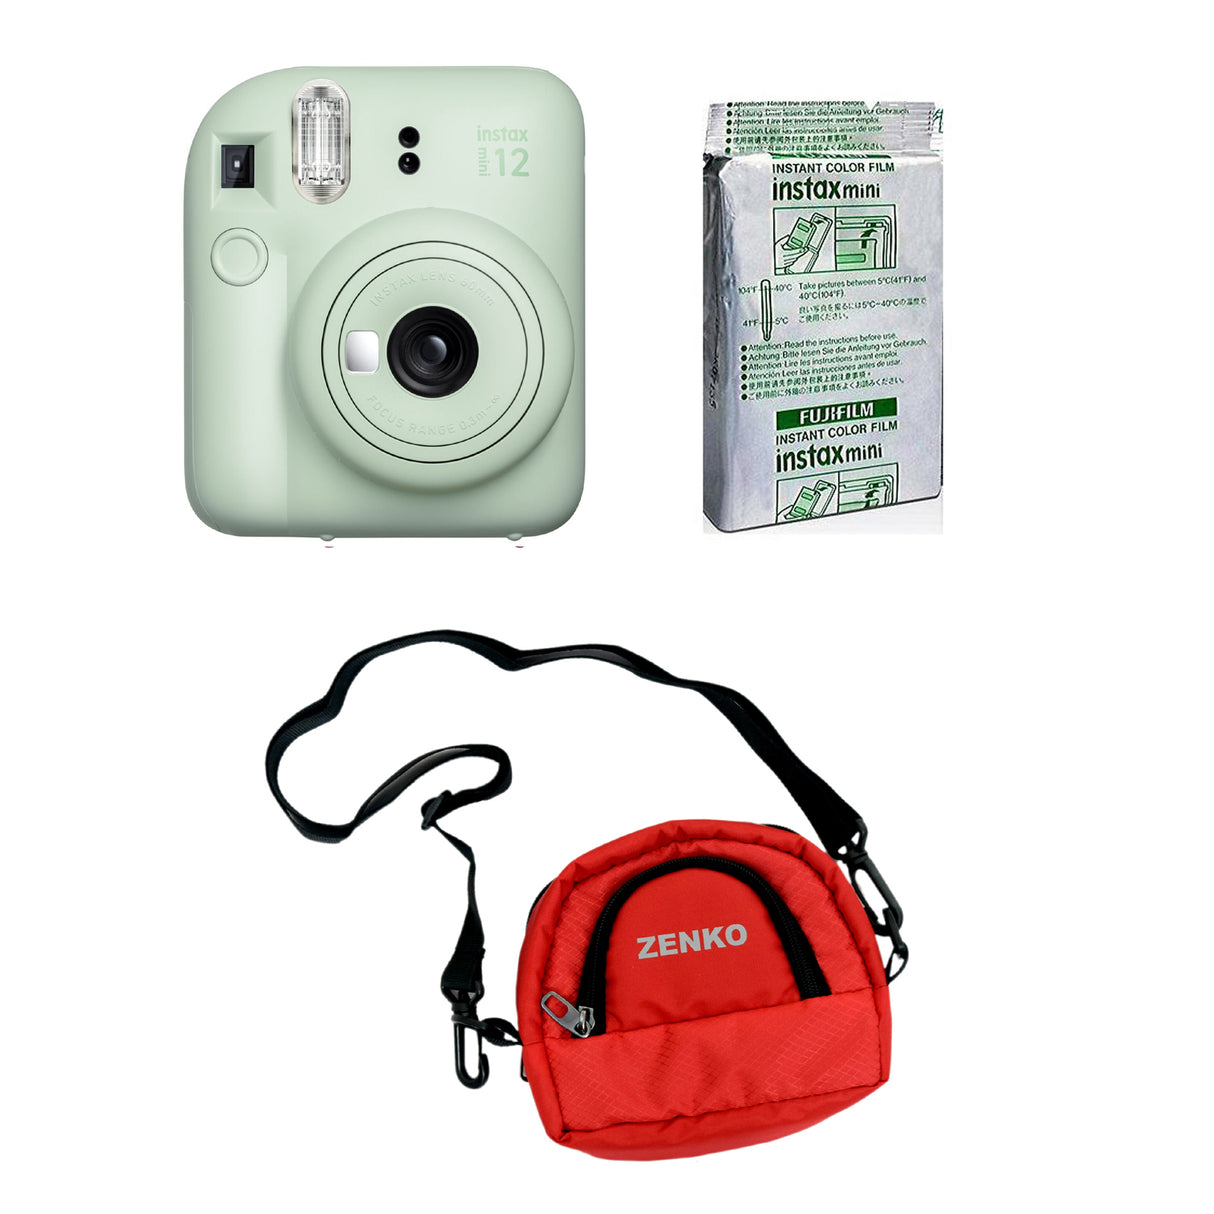 FUJIFILM INSTAX Mini 12 Instant Film Camera with 10X1 Pack of Instant Film With Red Pouch Kit (10 Exposures) Mint Green